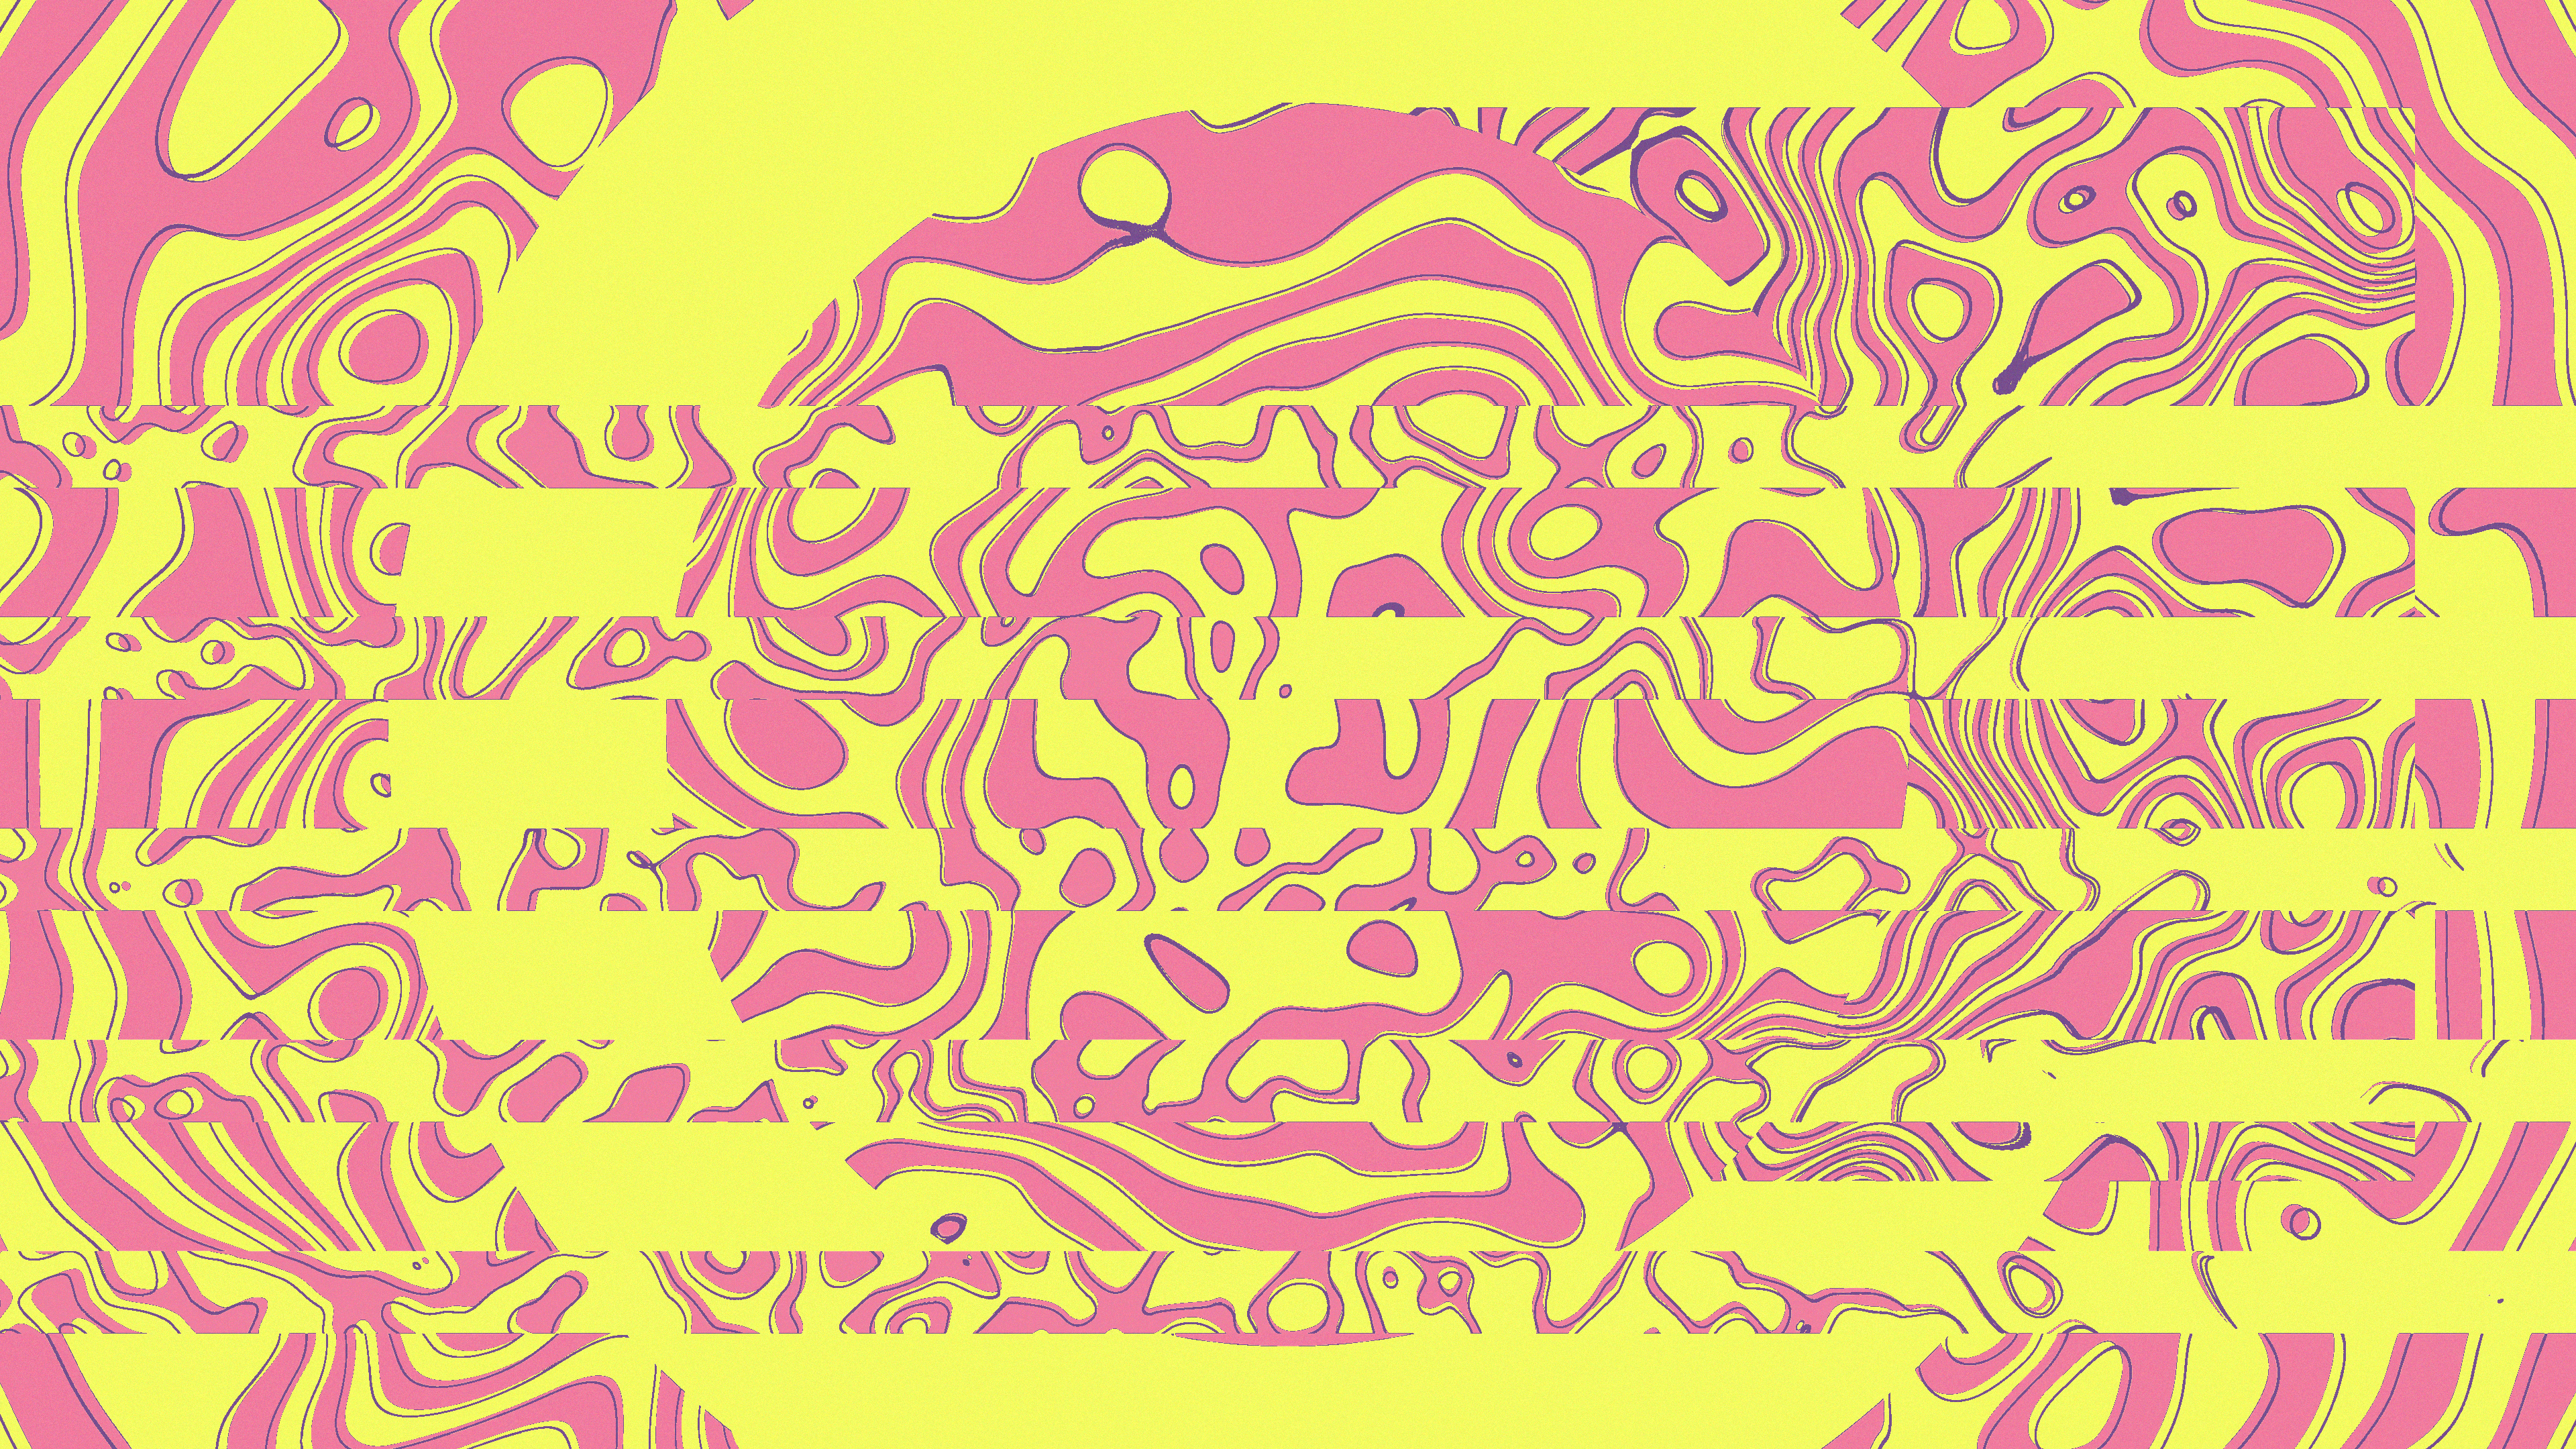 Stash_Squiggles_Styleframe_10